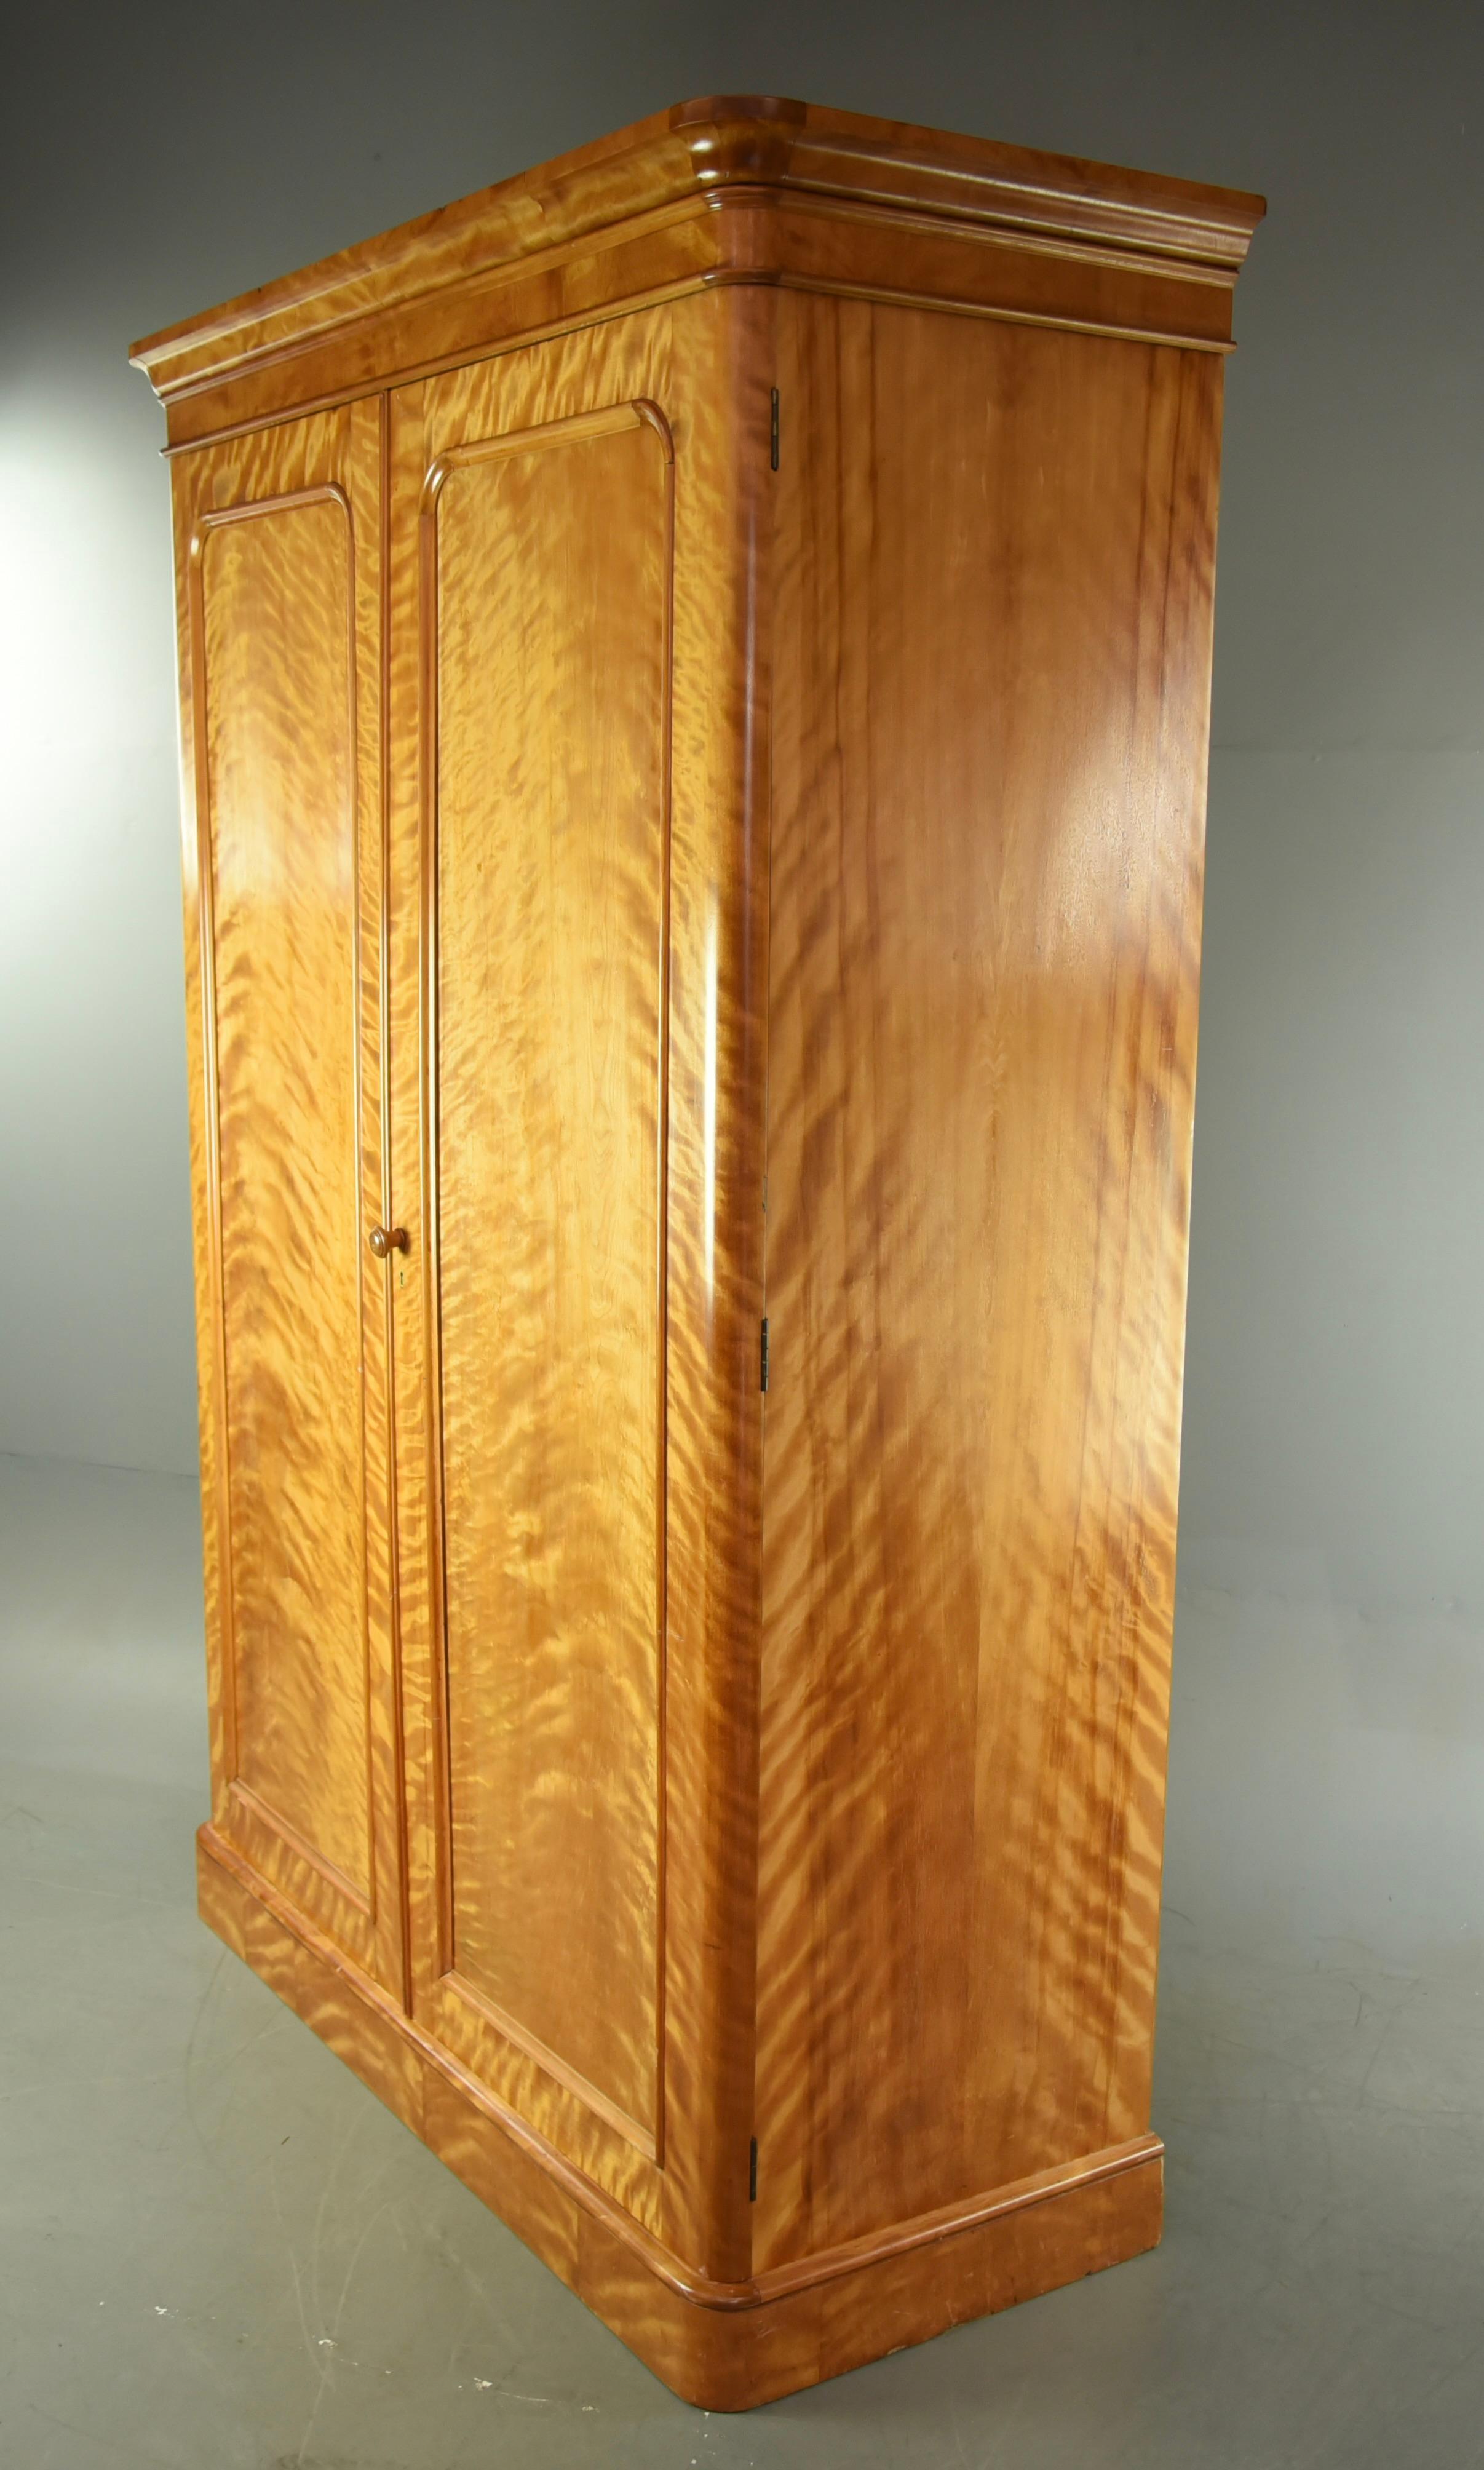 Fine quality Heal & son Victorian satinwood double wardrobe.
The wardrobe is in fantastic condition with a wonderful grain and colour ,very rare to find a double wardrobe in satin wood made from a top quality cabinet makers Heal & son of